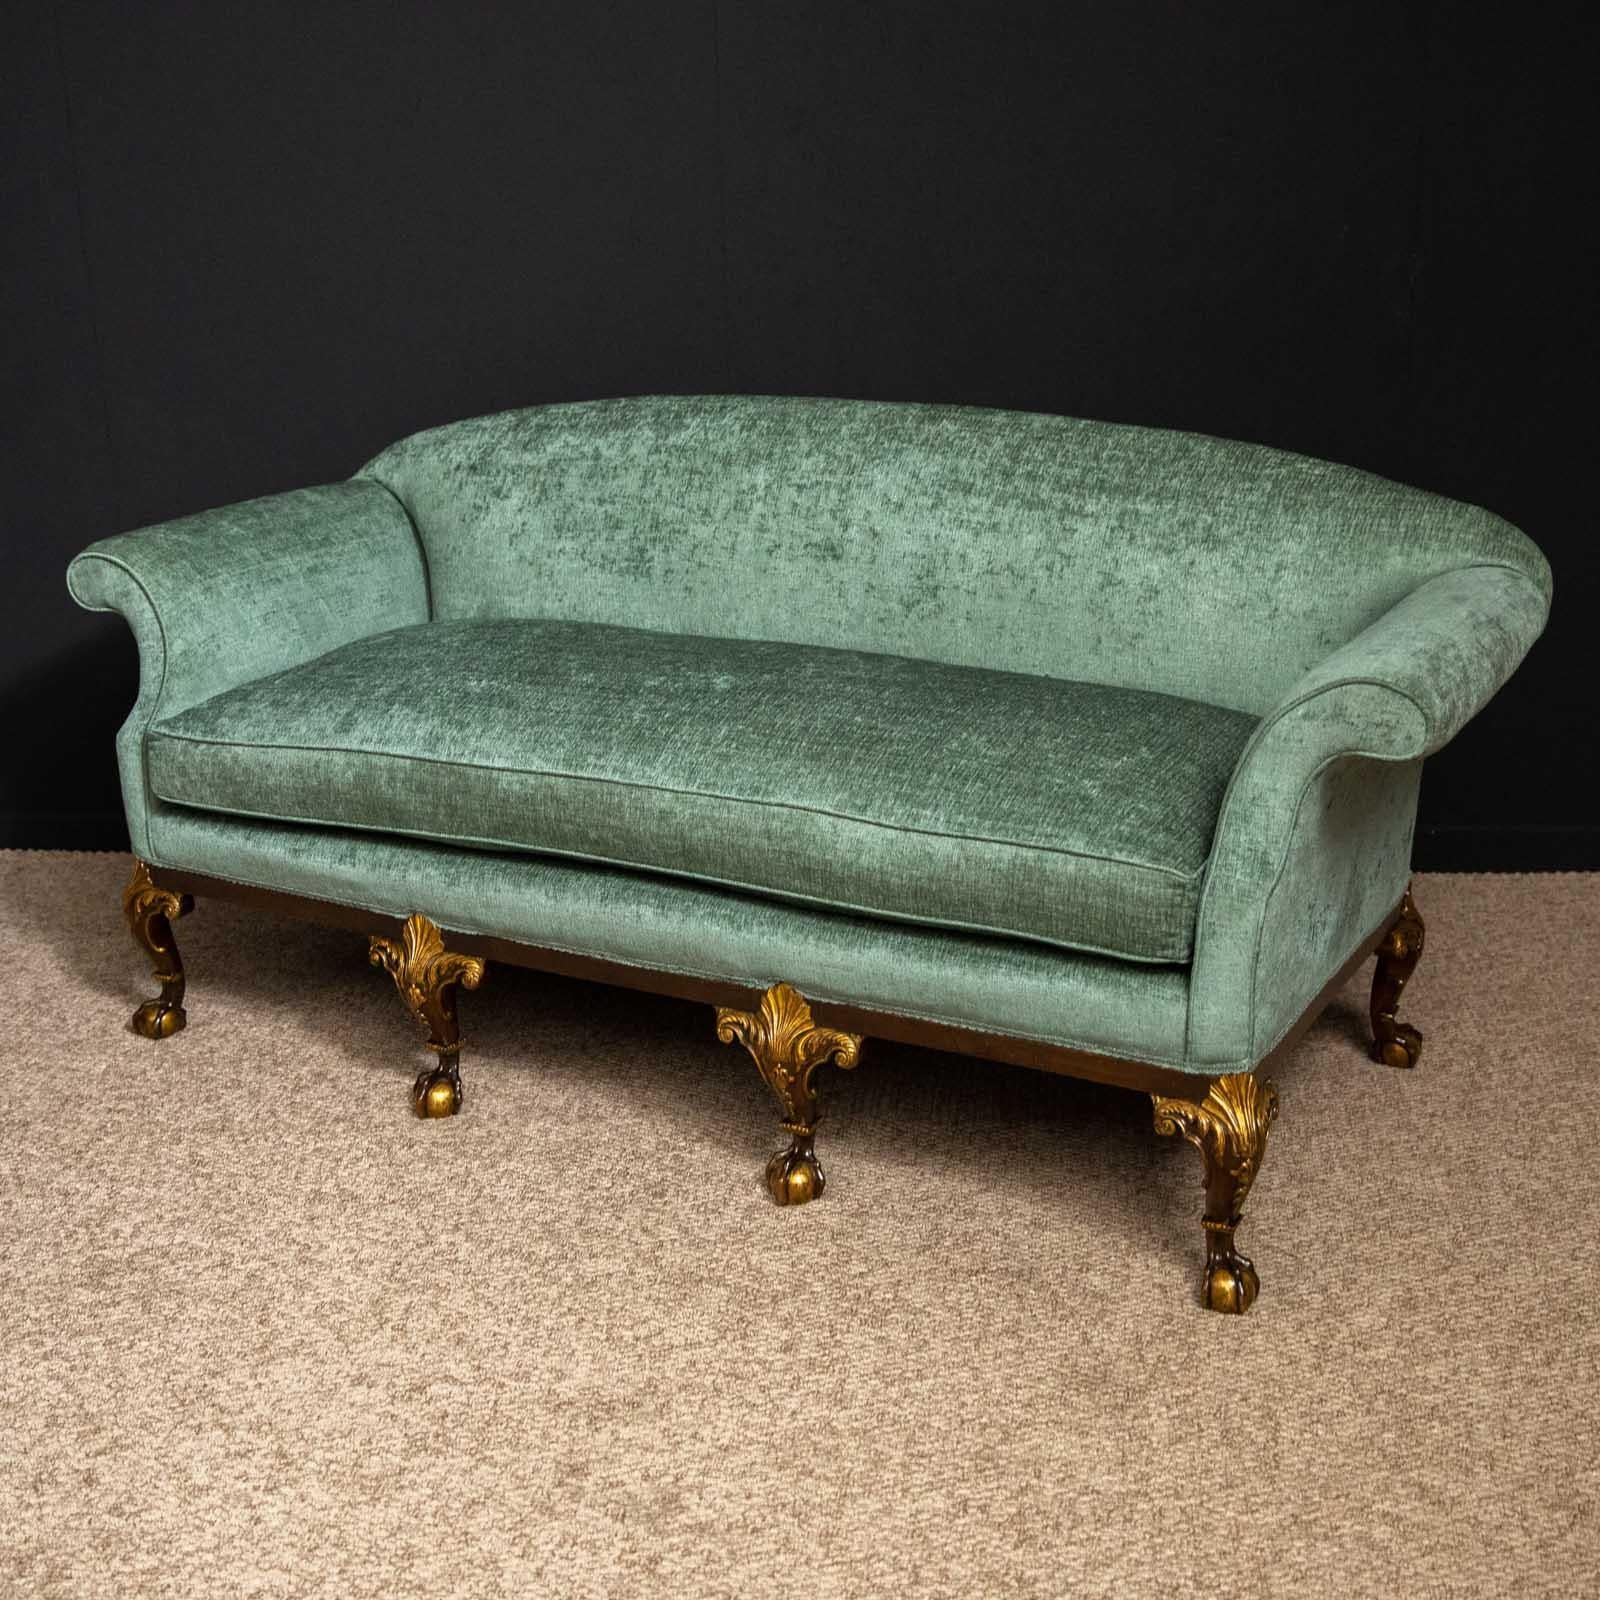 An extremely elegant sofa from the 1920s. The finely carved mid-18th century style legs are solid walnut with parcel gilt highlights. The upholstery is new and of a silky looking green chenille. A super quality piece that looks quite stunning.
  